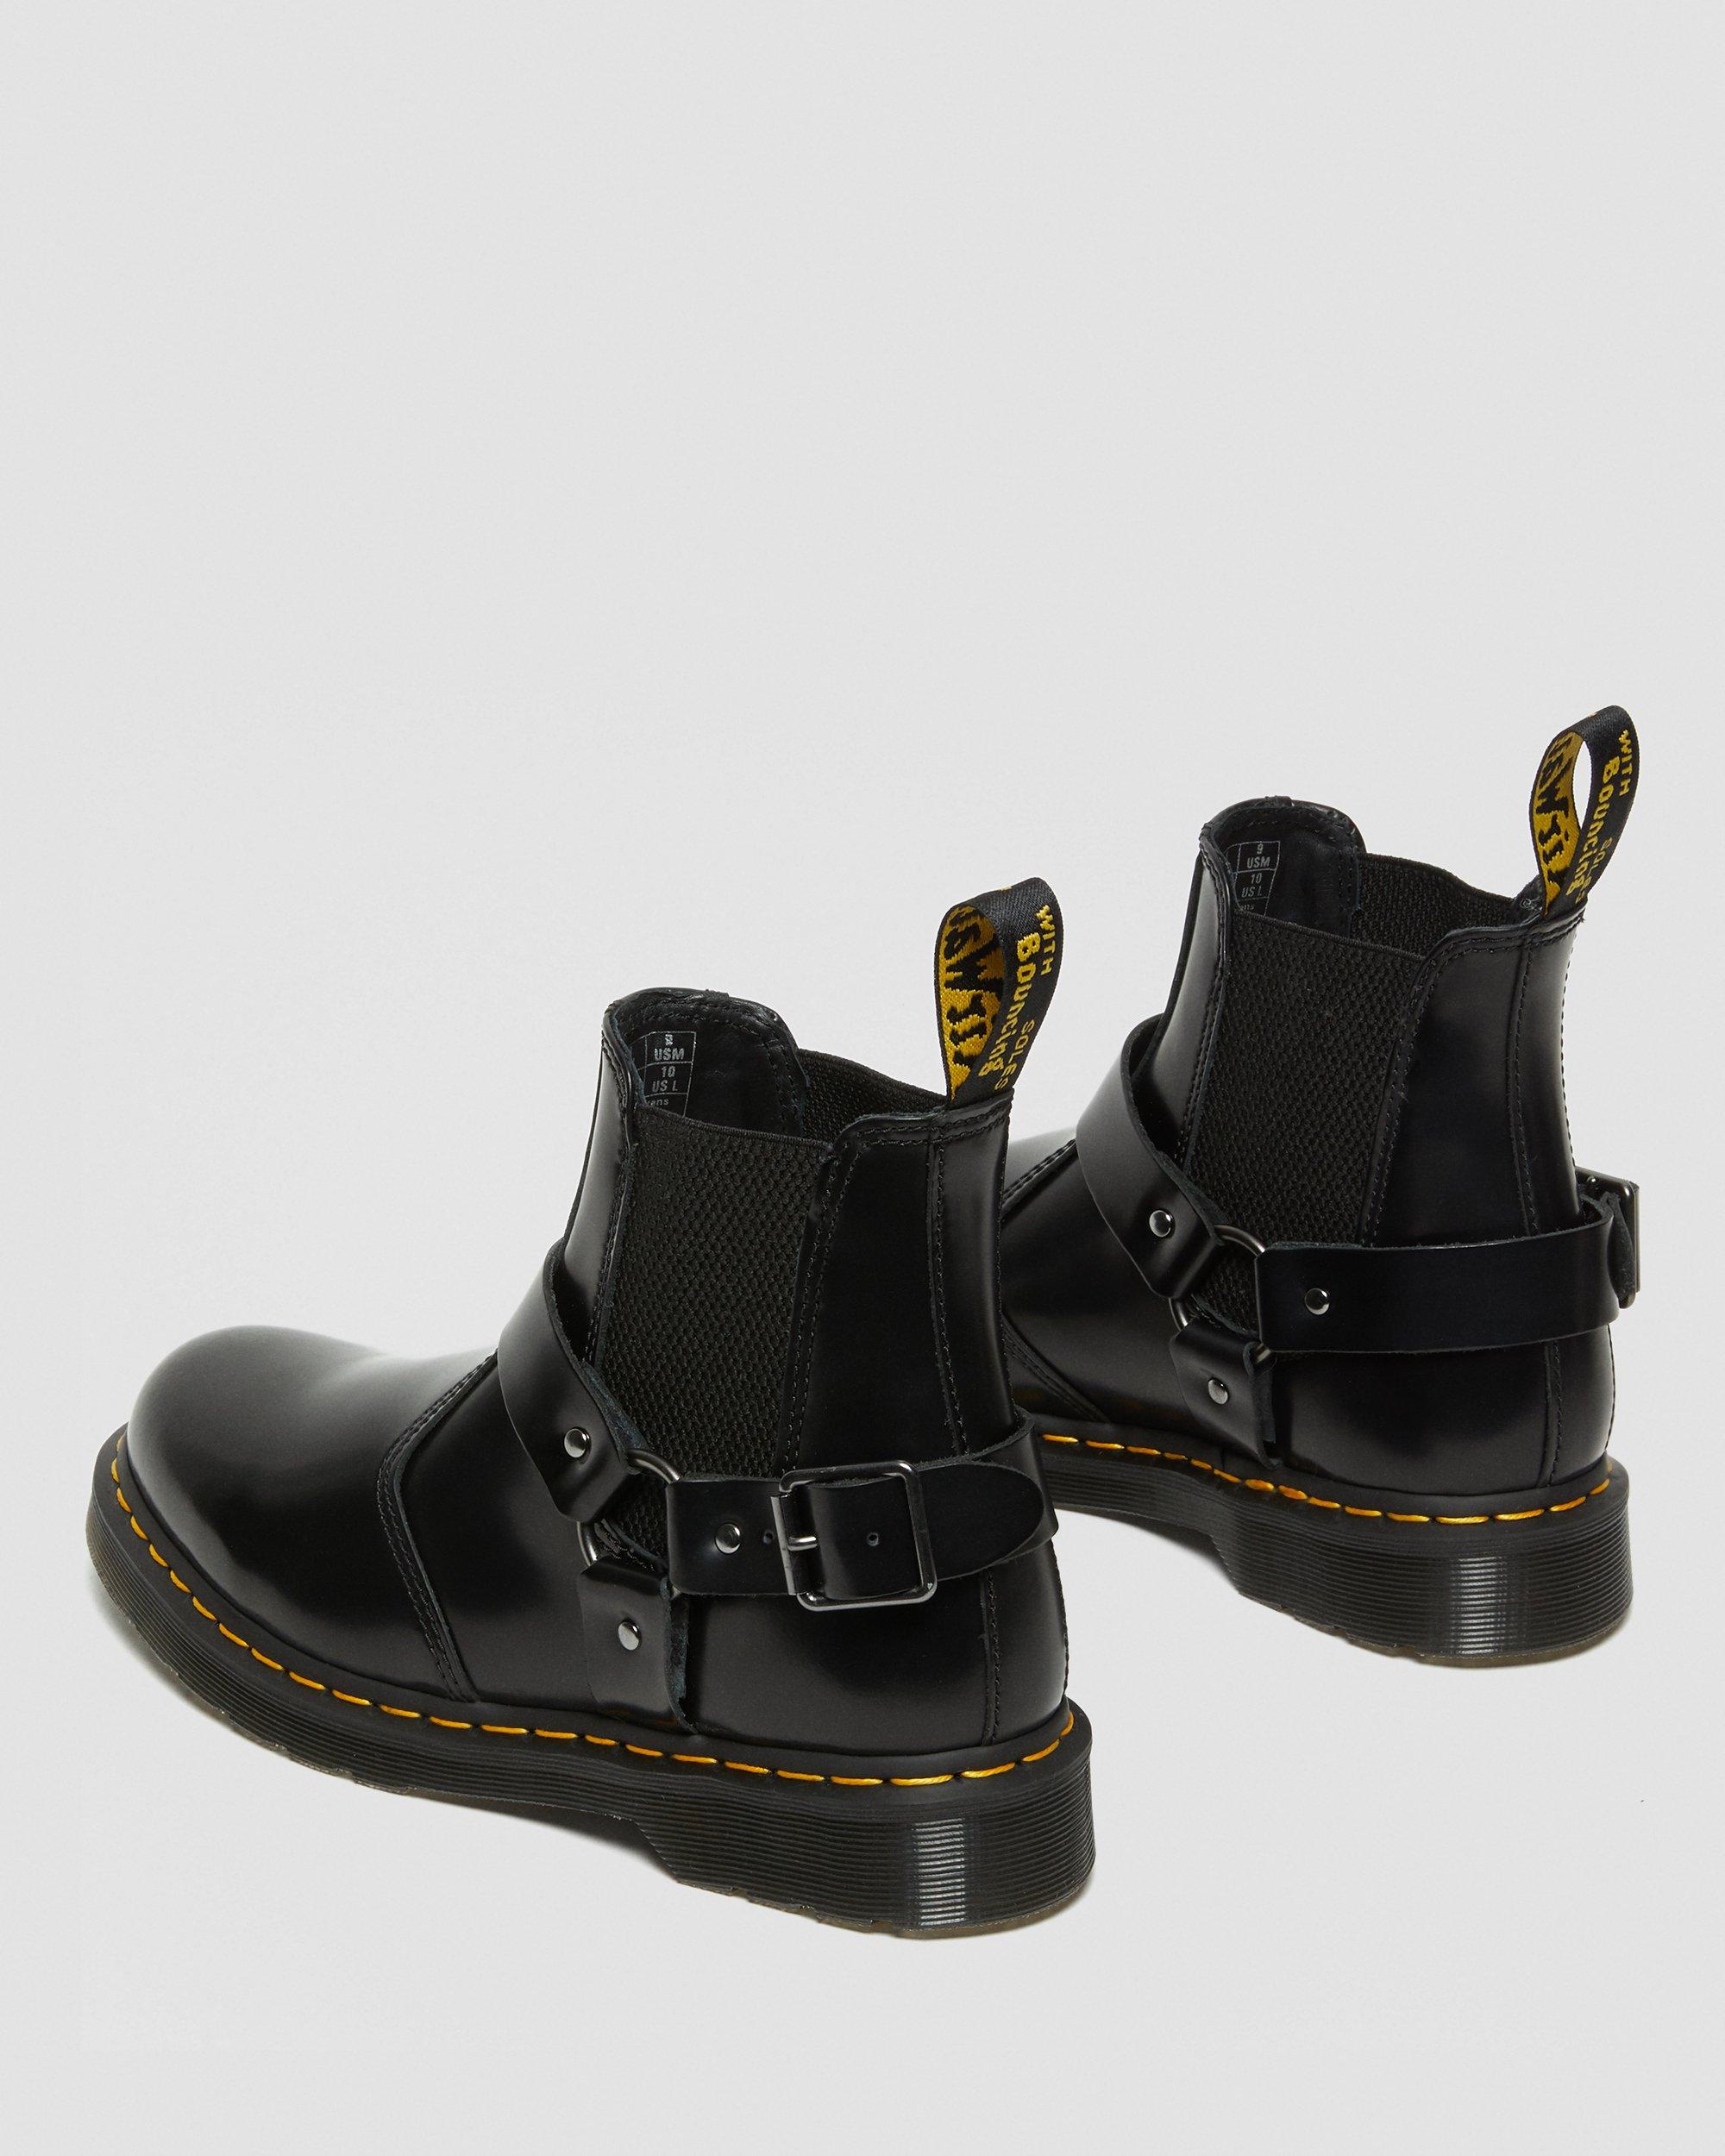 WINCOX BLACKWINCOX LEATHER CHELSEA BOOTS Dr. Martens